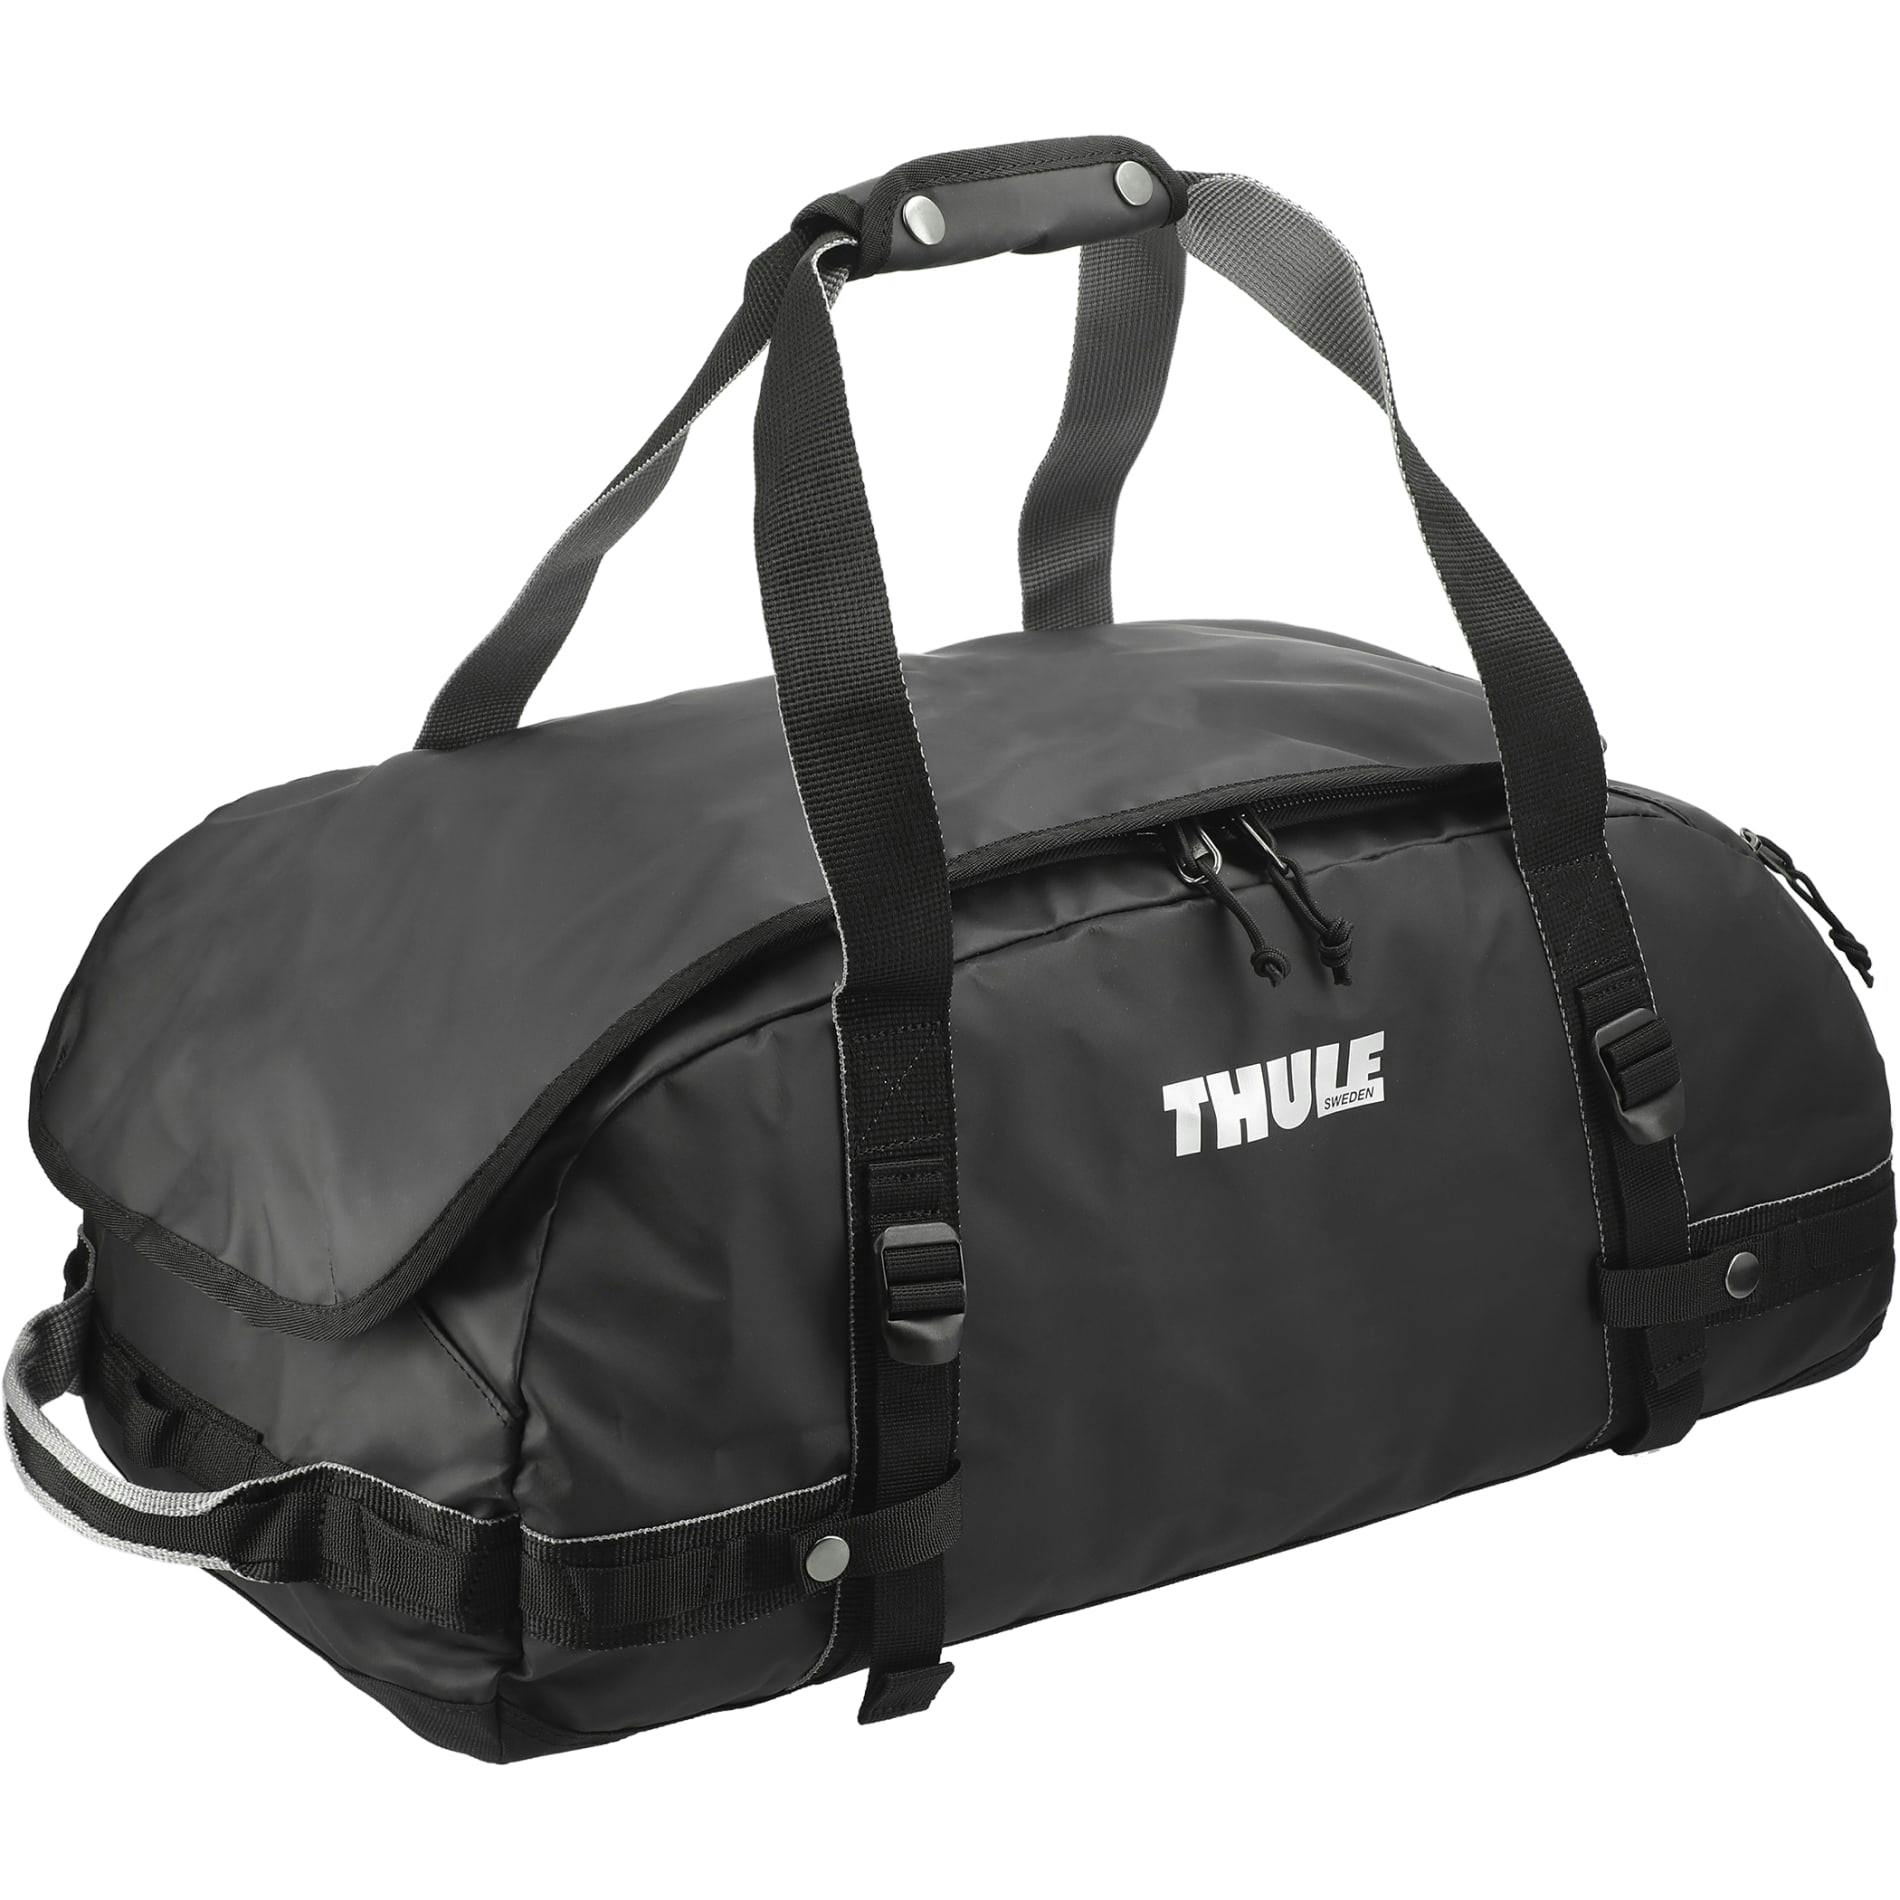 Thule® Chasm 40L Duffel - additional Image 1